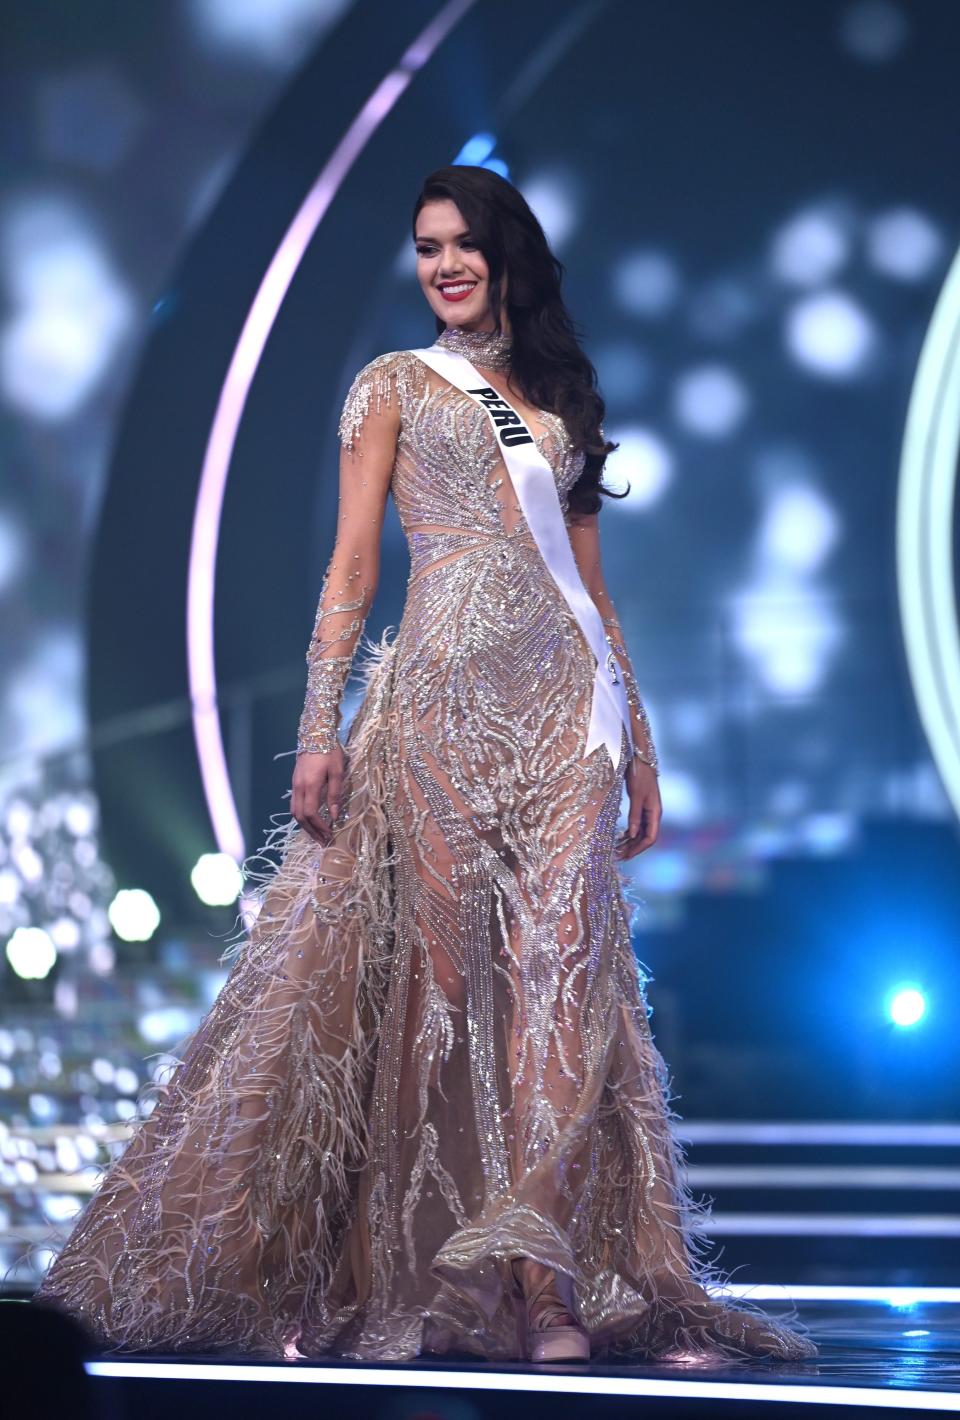 Miss Peru at the 2021 Miss Universe pageant.